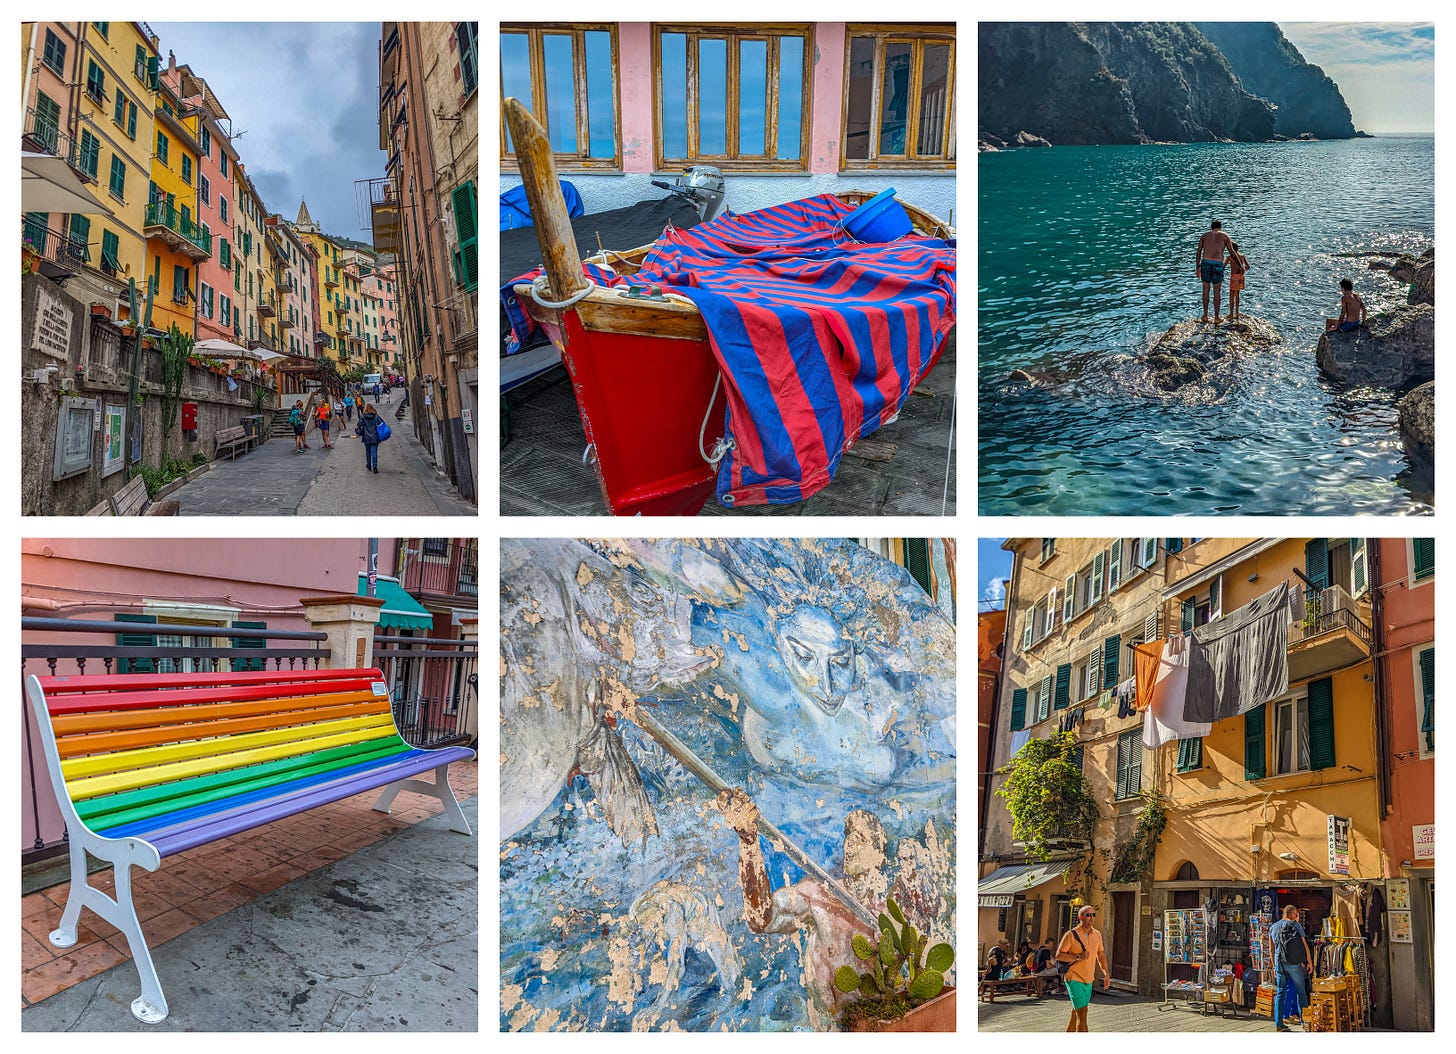 A collection of pictures including a street, a red boat covered with a blue and red striped tarp, a man and his son getting ready to dive into the water, a bench painted with the colors of the gay Pride flag, a mural of a woman, and clothes hanging out to dry. 